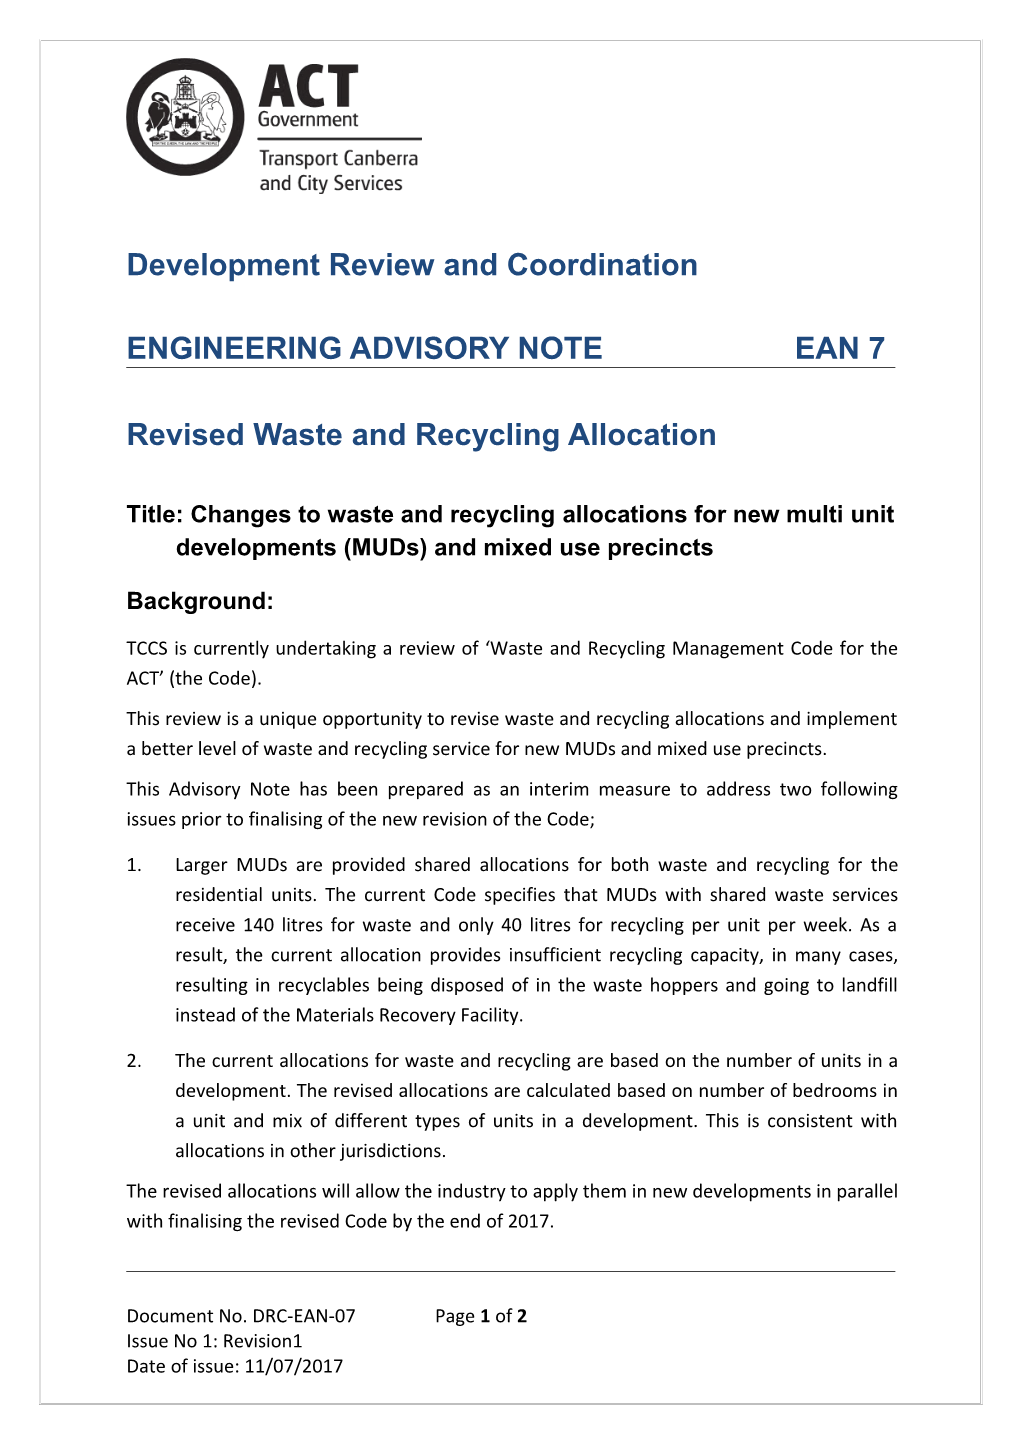 Engineering Advisory Note 7 Revised Waste and Recycling Allocation